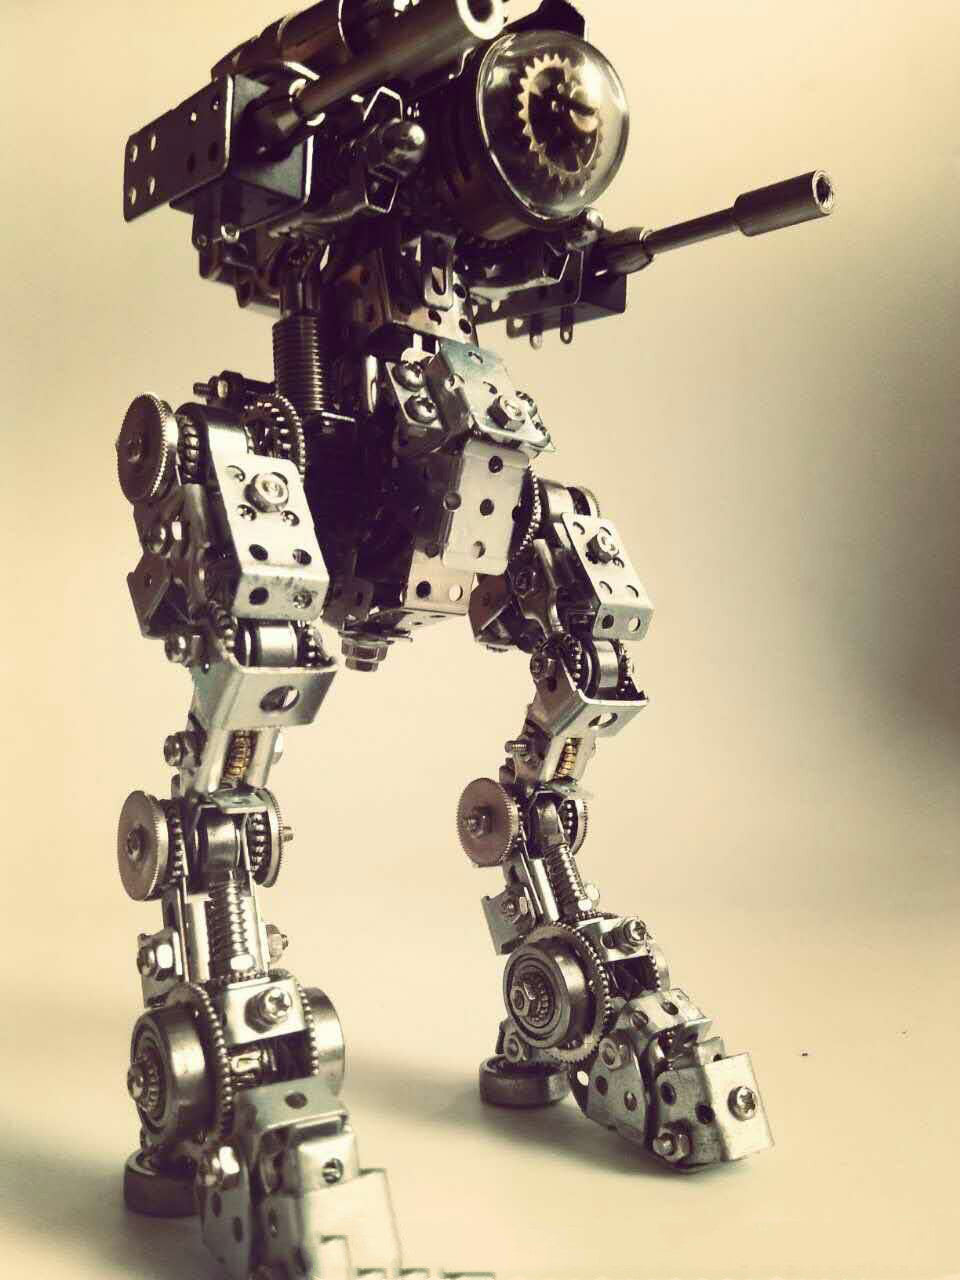 A Maramalive™ Steampunk style [mechanical overlord] model ornament is standing next to a toy robot.